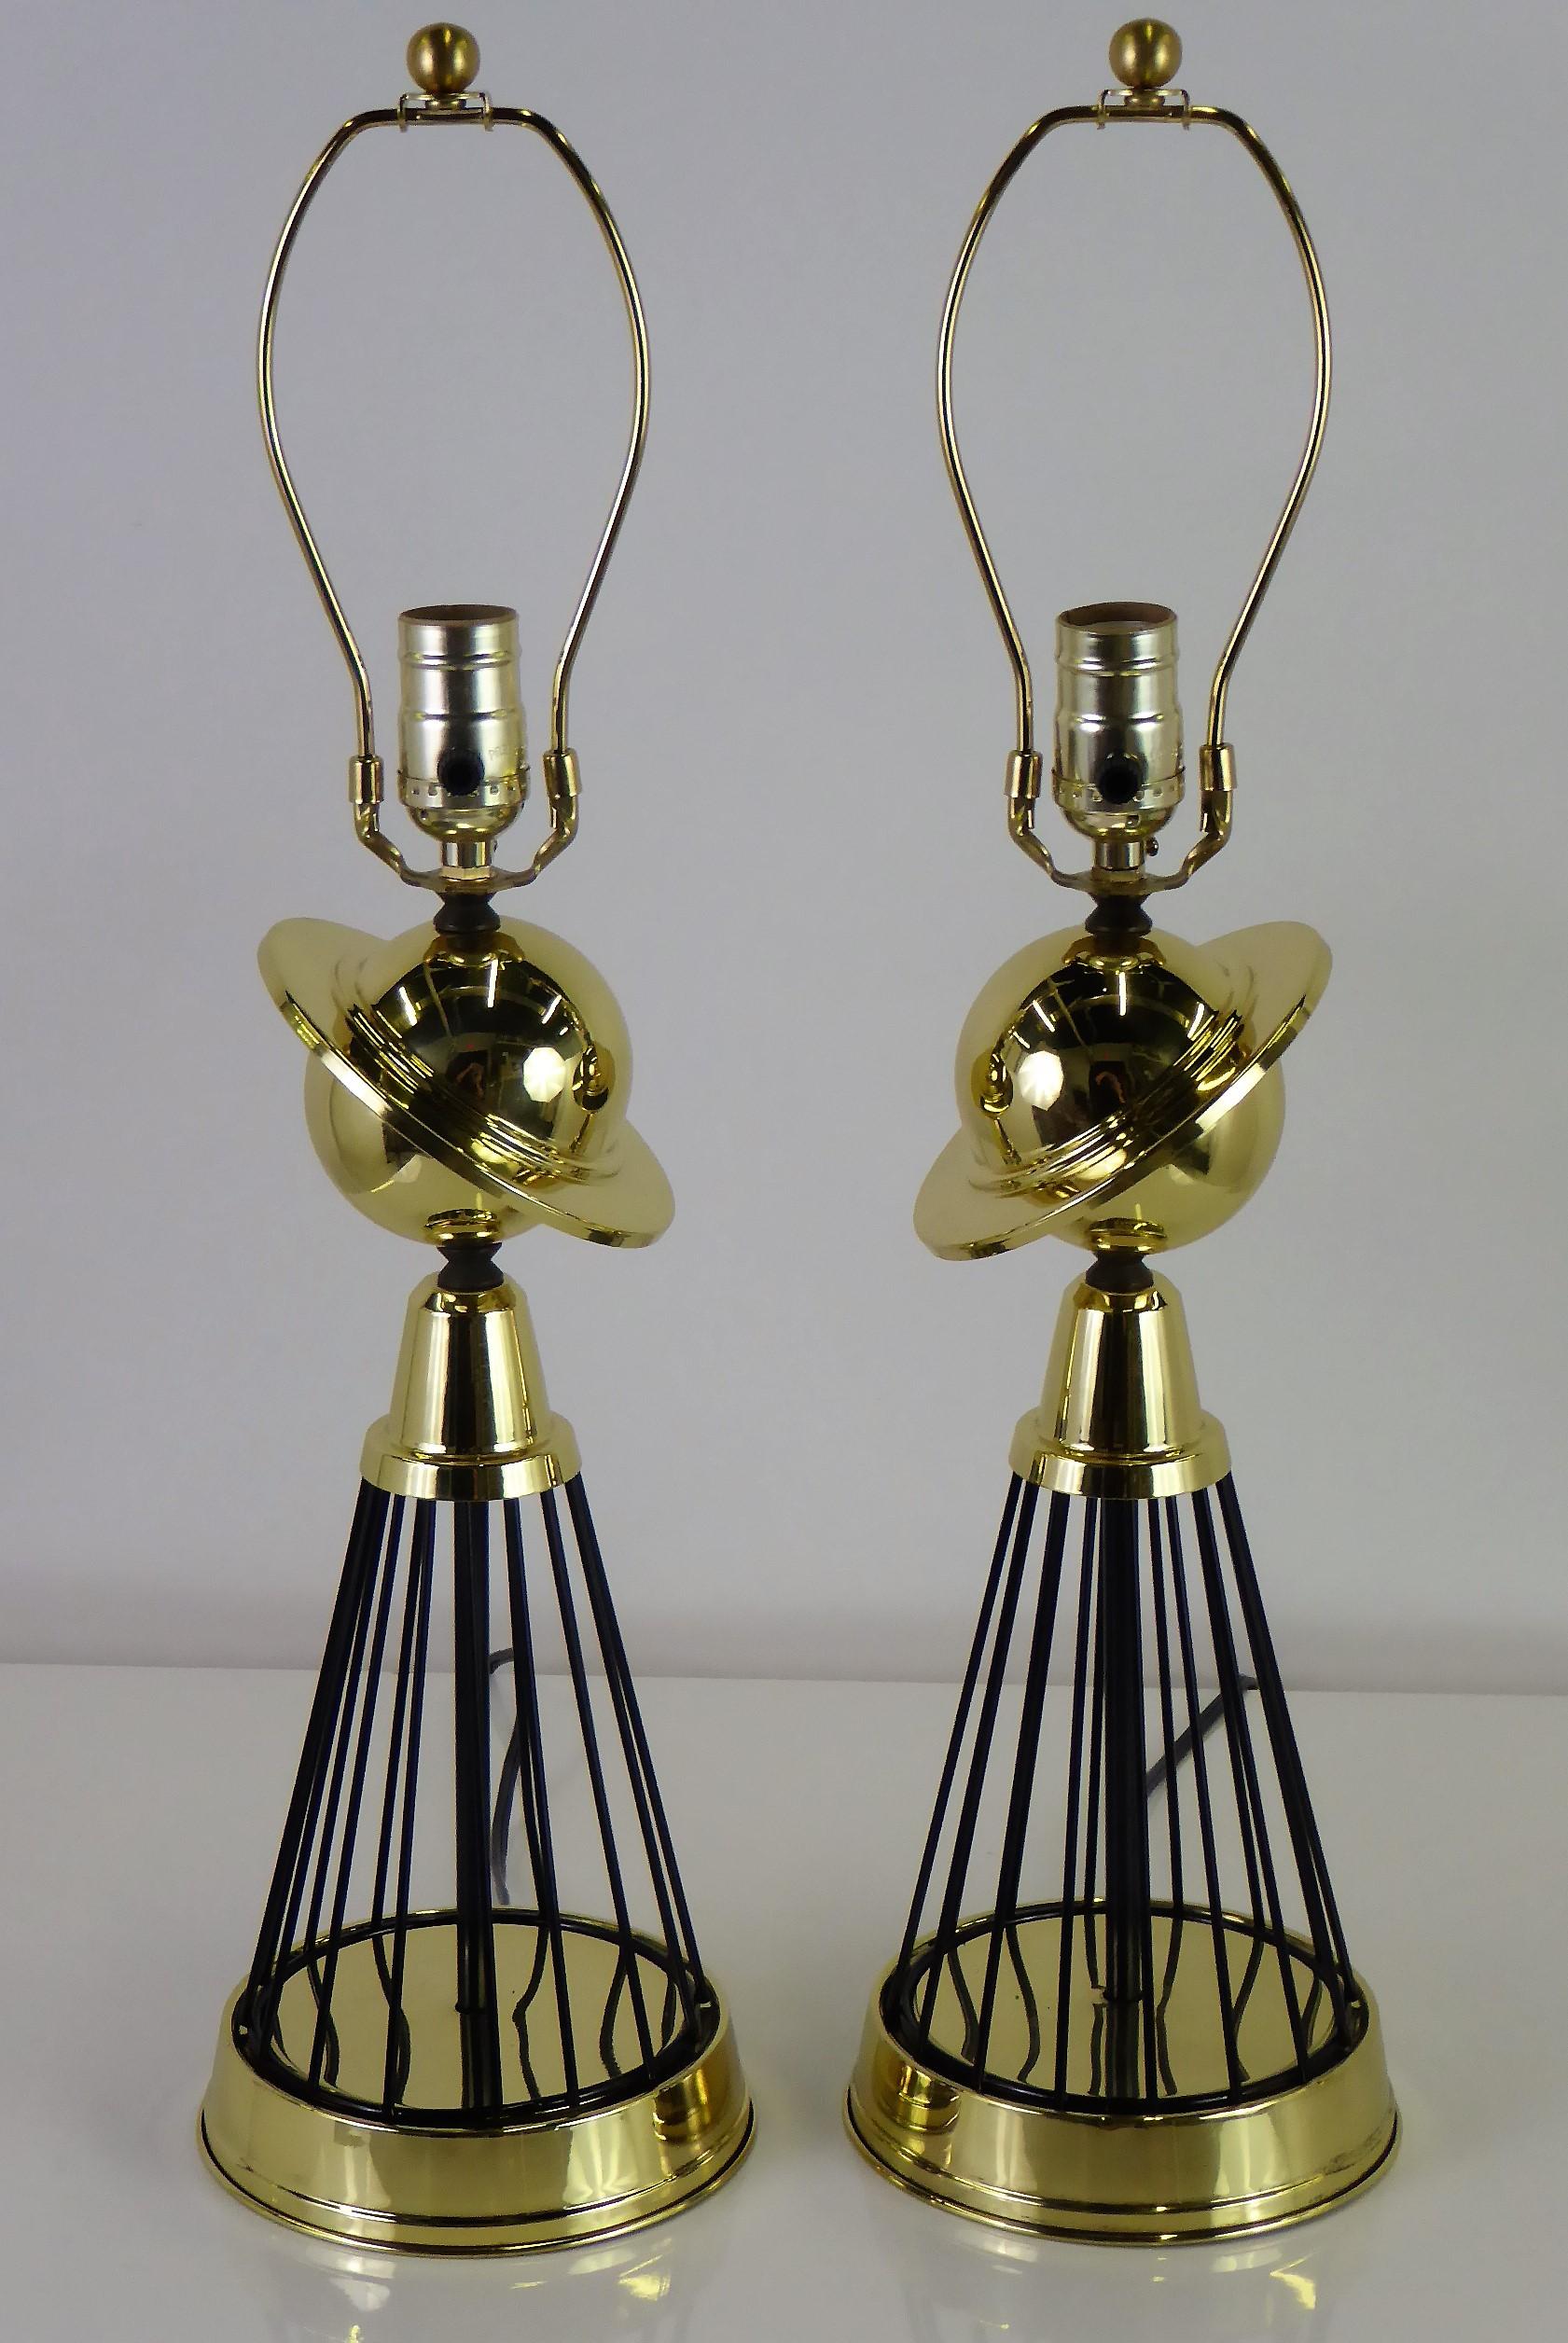 Spectacular pair of 1940s brass and black wire table Lamps with a Saturn motif. Re-brassed and re-lacquered, they are in perfect order with new wiring and new UL three level sockets, medium base. Fully restored. Shades shown as examples, just add